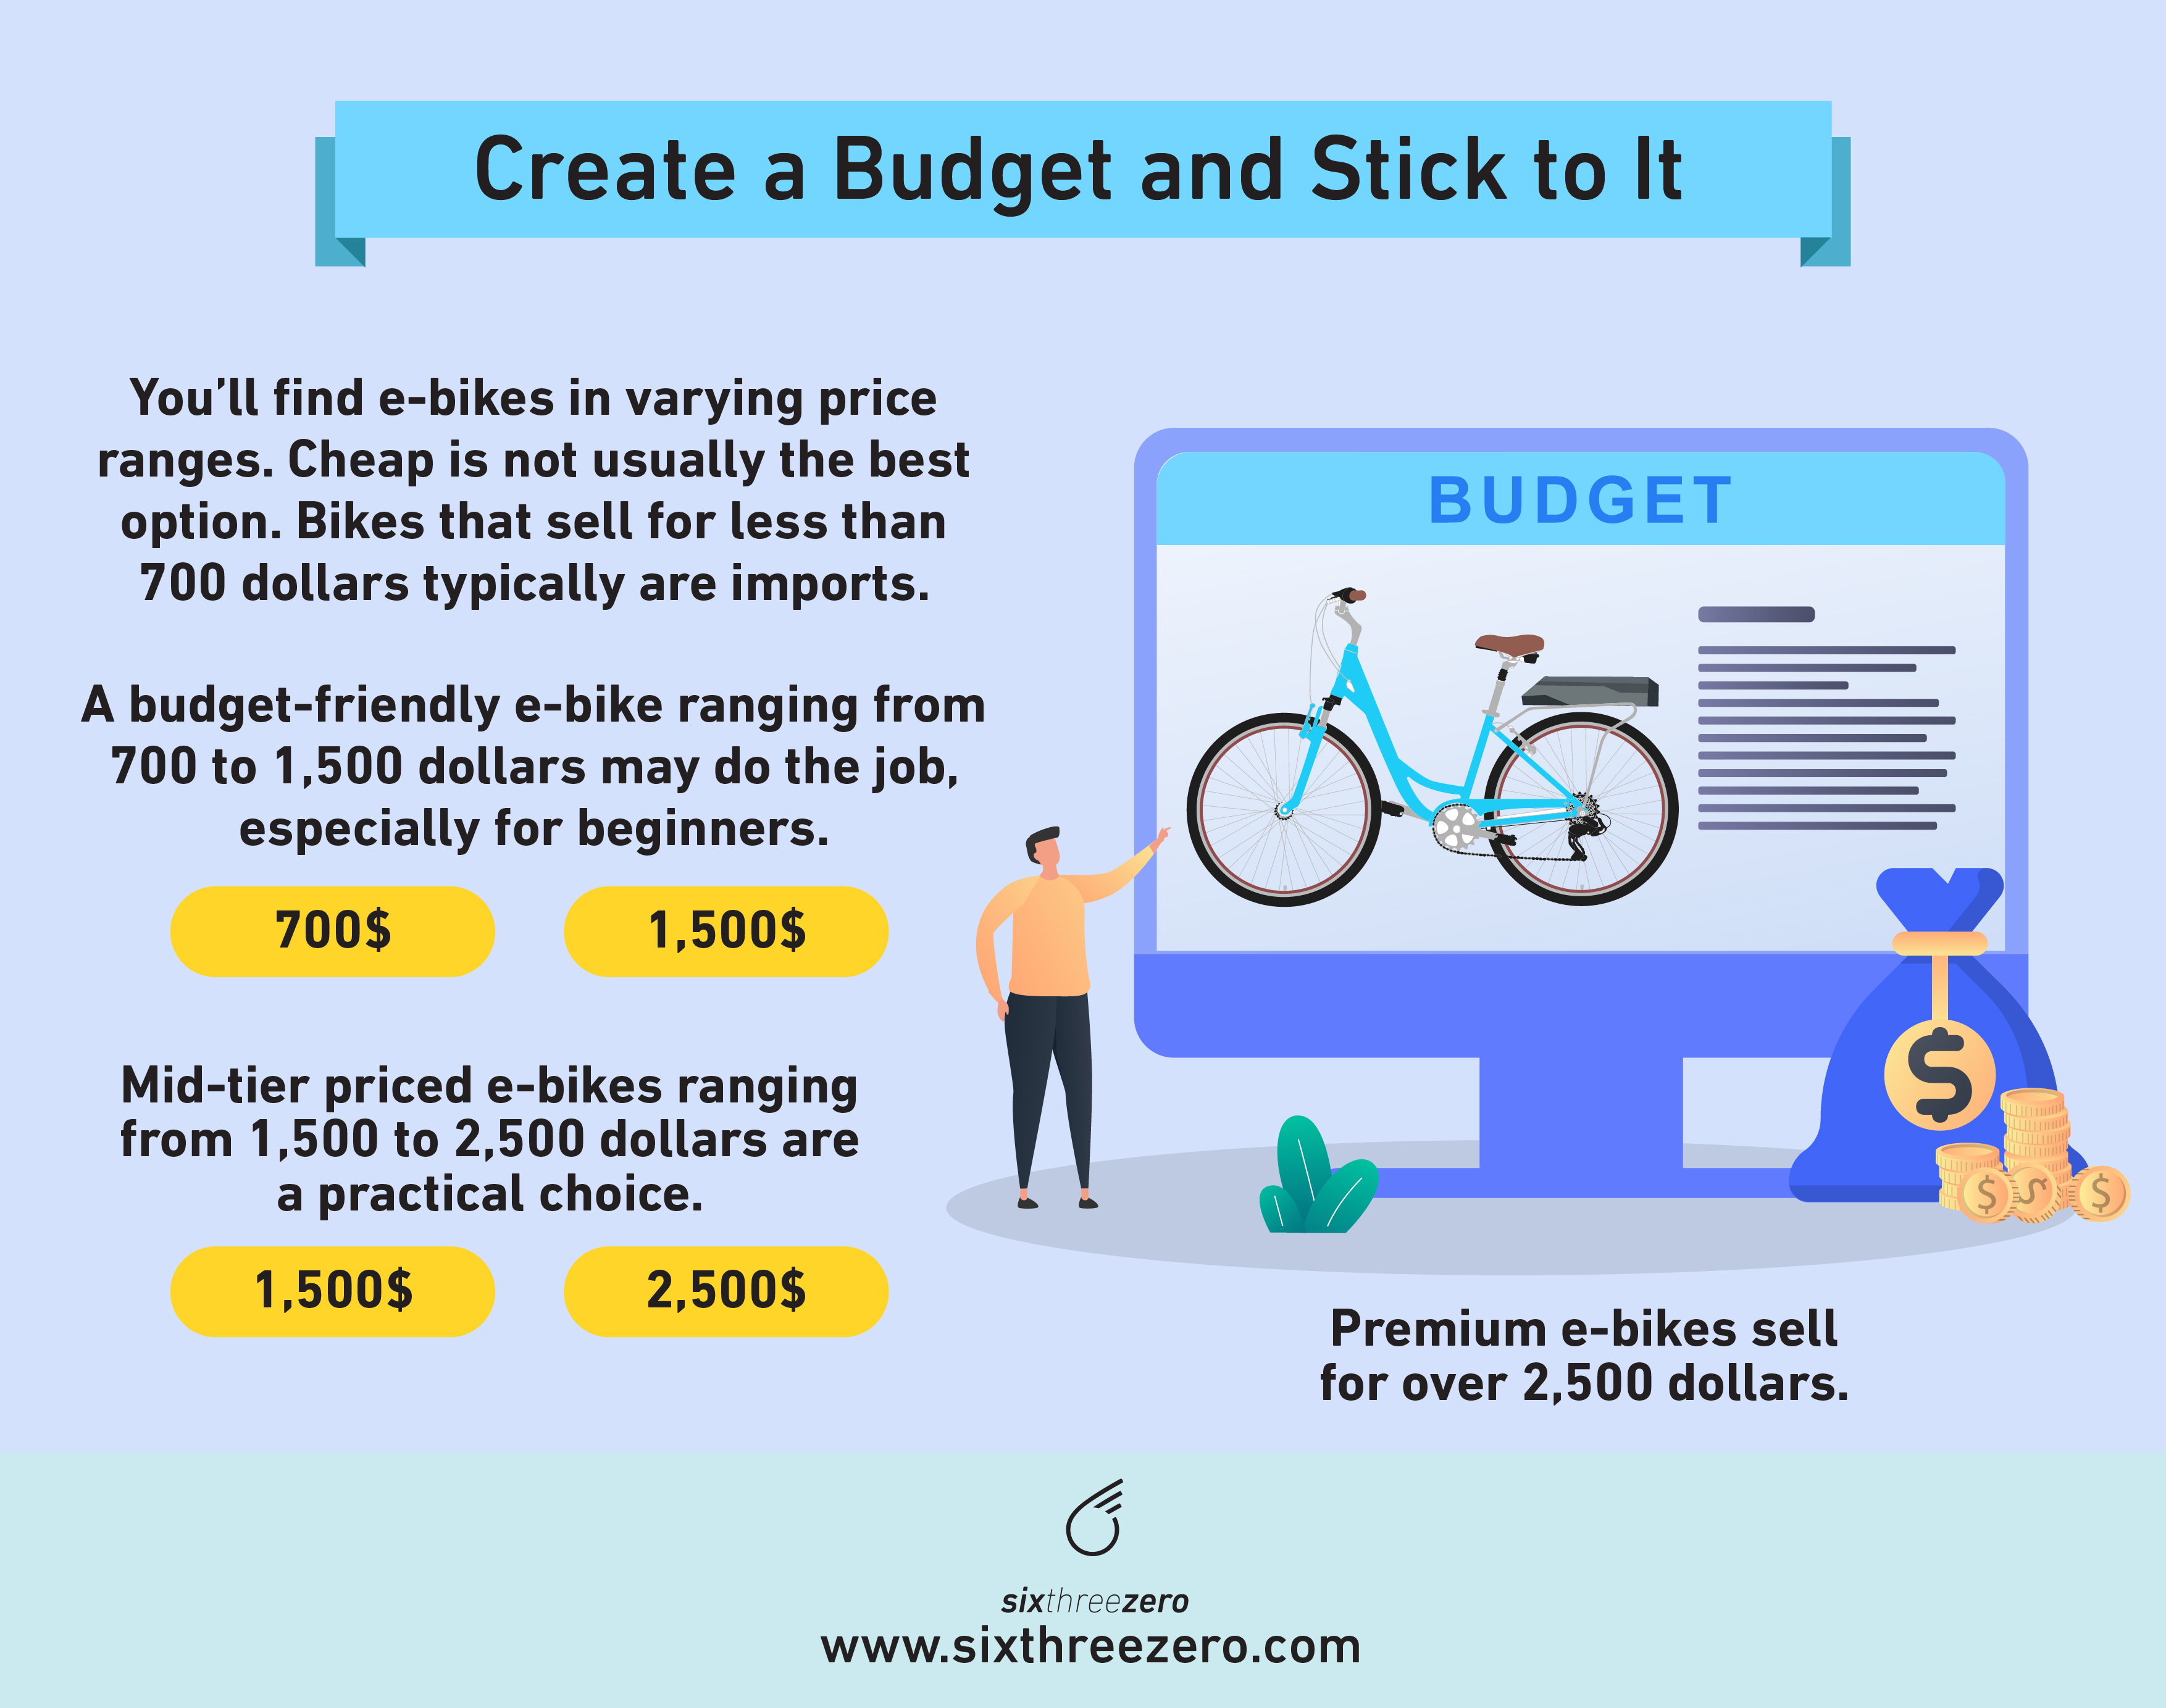 Tips for buying an Electric Bike Online